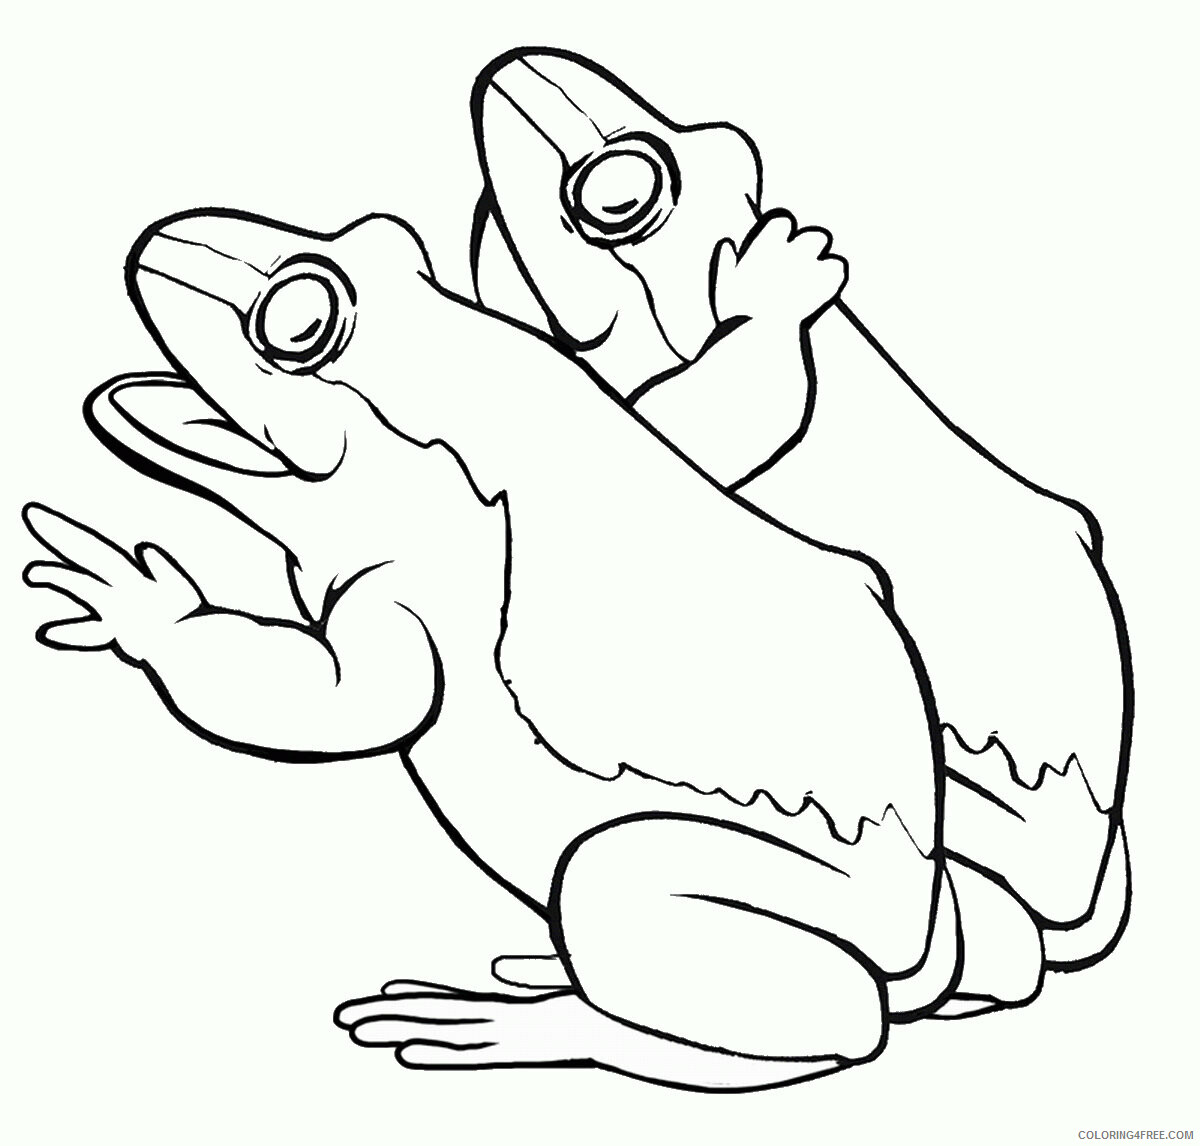 Frog Coloring Pages Animal Printable Sheets frog_cl_06 2021 2282 Coloring4free